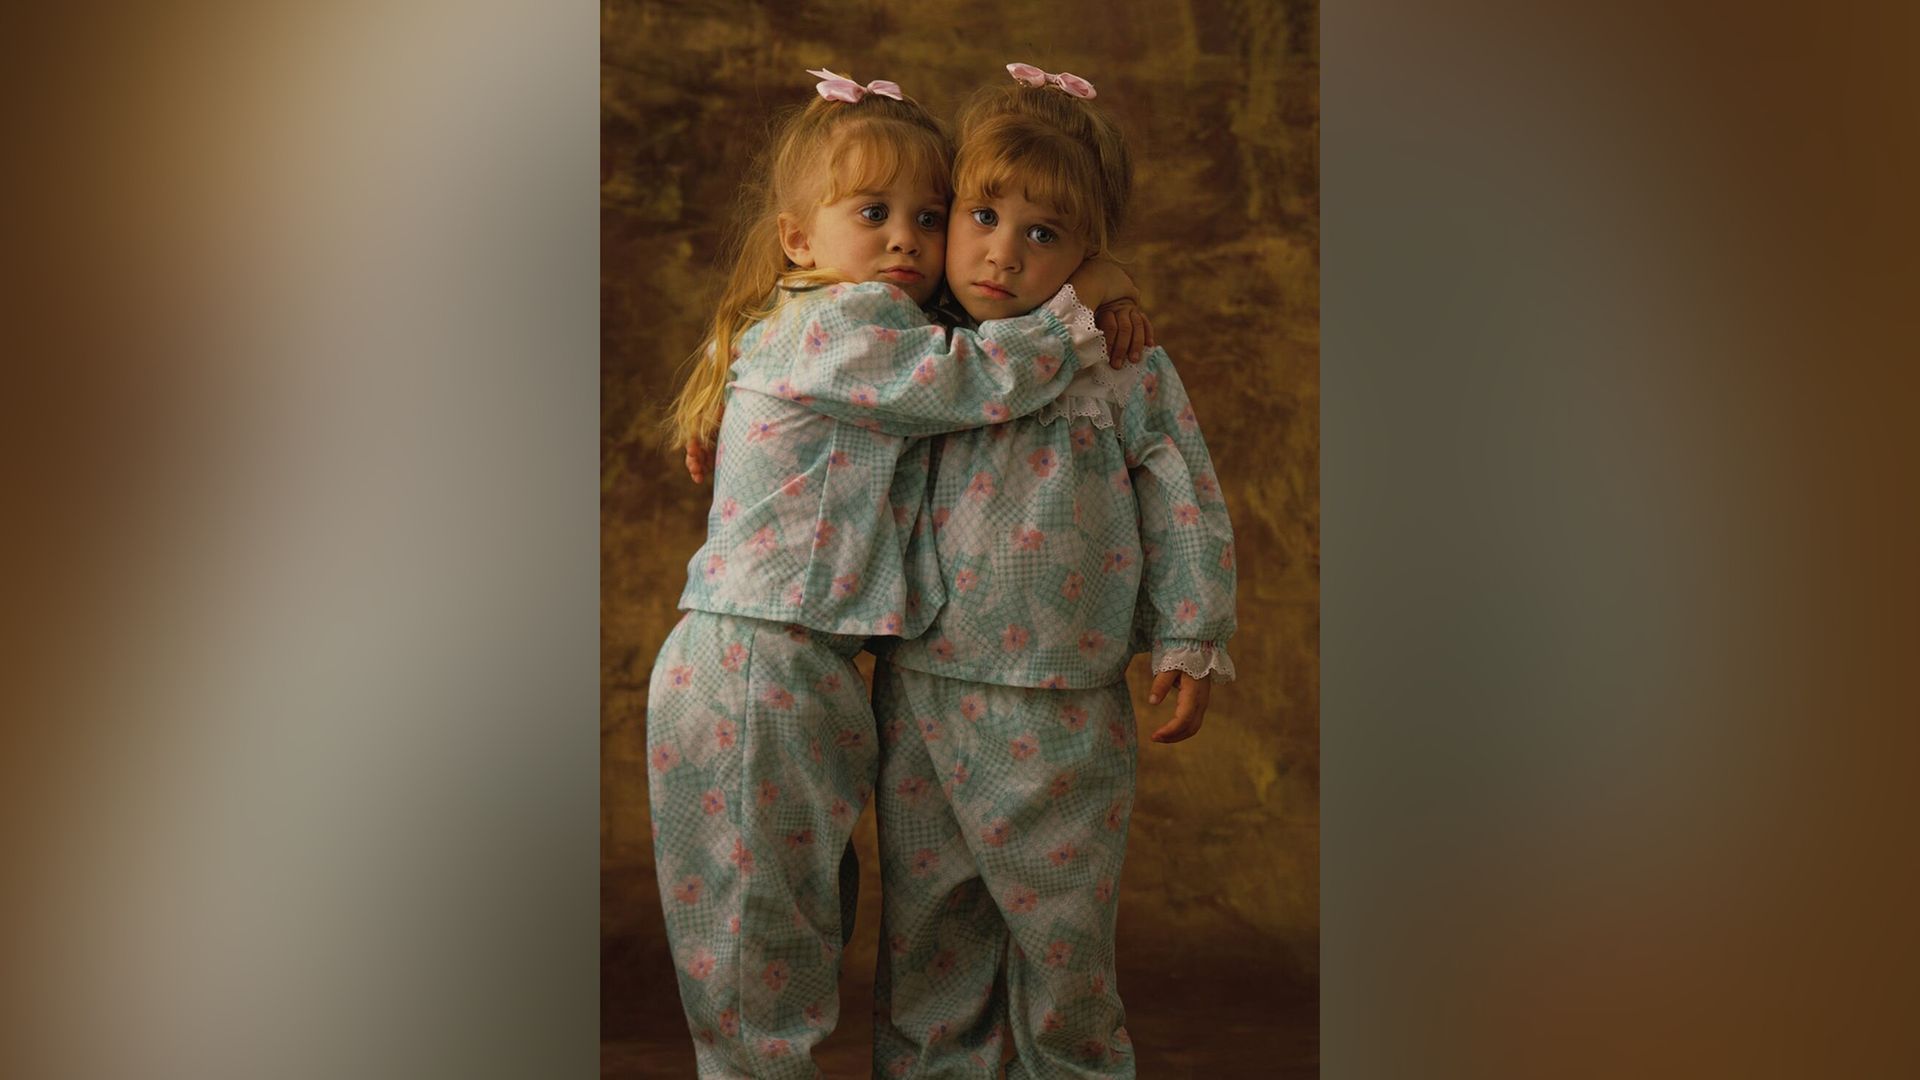 Ashley and Mary-Kate Olsen in childhood